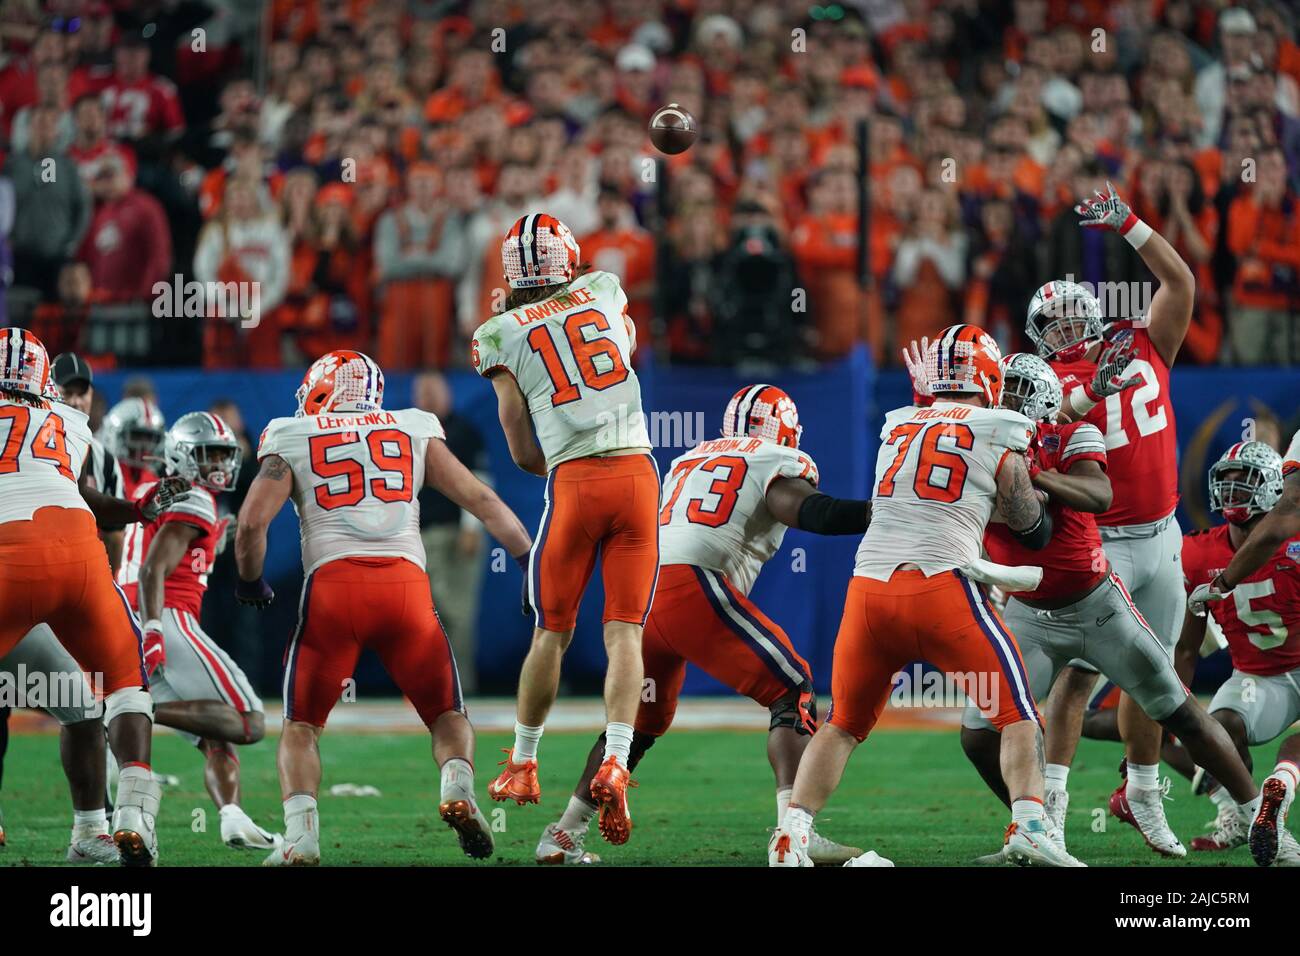 Glendale, AZ, USA. 28th Dec, 2019. Clemson Tigers quarterback (16) Trevor Lawrence in action versus the Ohio State Buckeyes at the PlayStation Fiesta Bowl, at State Farm stadium, in Glendale, AZ., On December 28, 2019. (Absolute Complete Photographer & Company Credit: Jose Marin/MarinMedia.org/Cal Sport Media) (HOLLYWOOD LIFE OUT, SHUTTERSTOCK OUT, LAS VEGAS RAIDERS OUT). Credit: csm/Alamy Live News Stock Photo